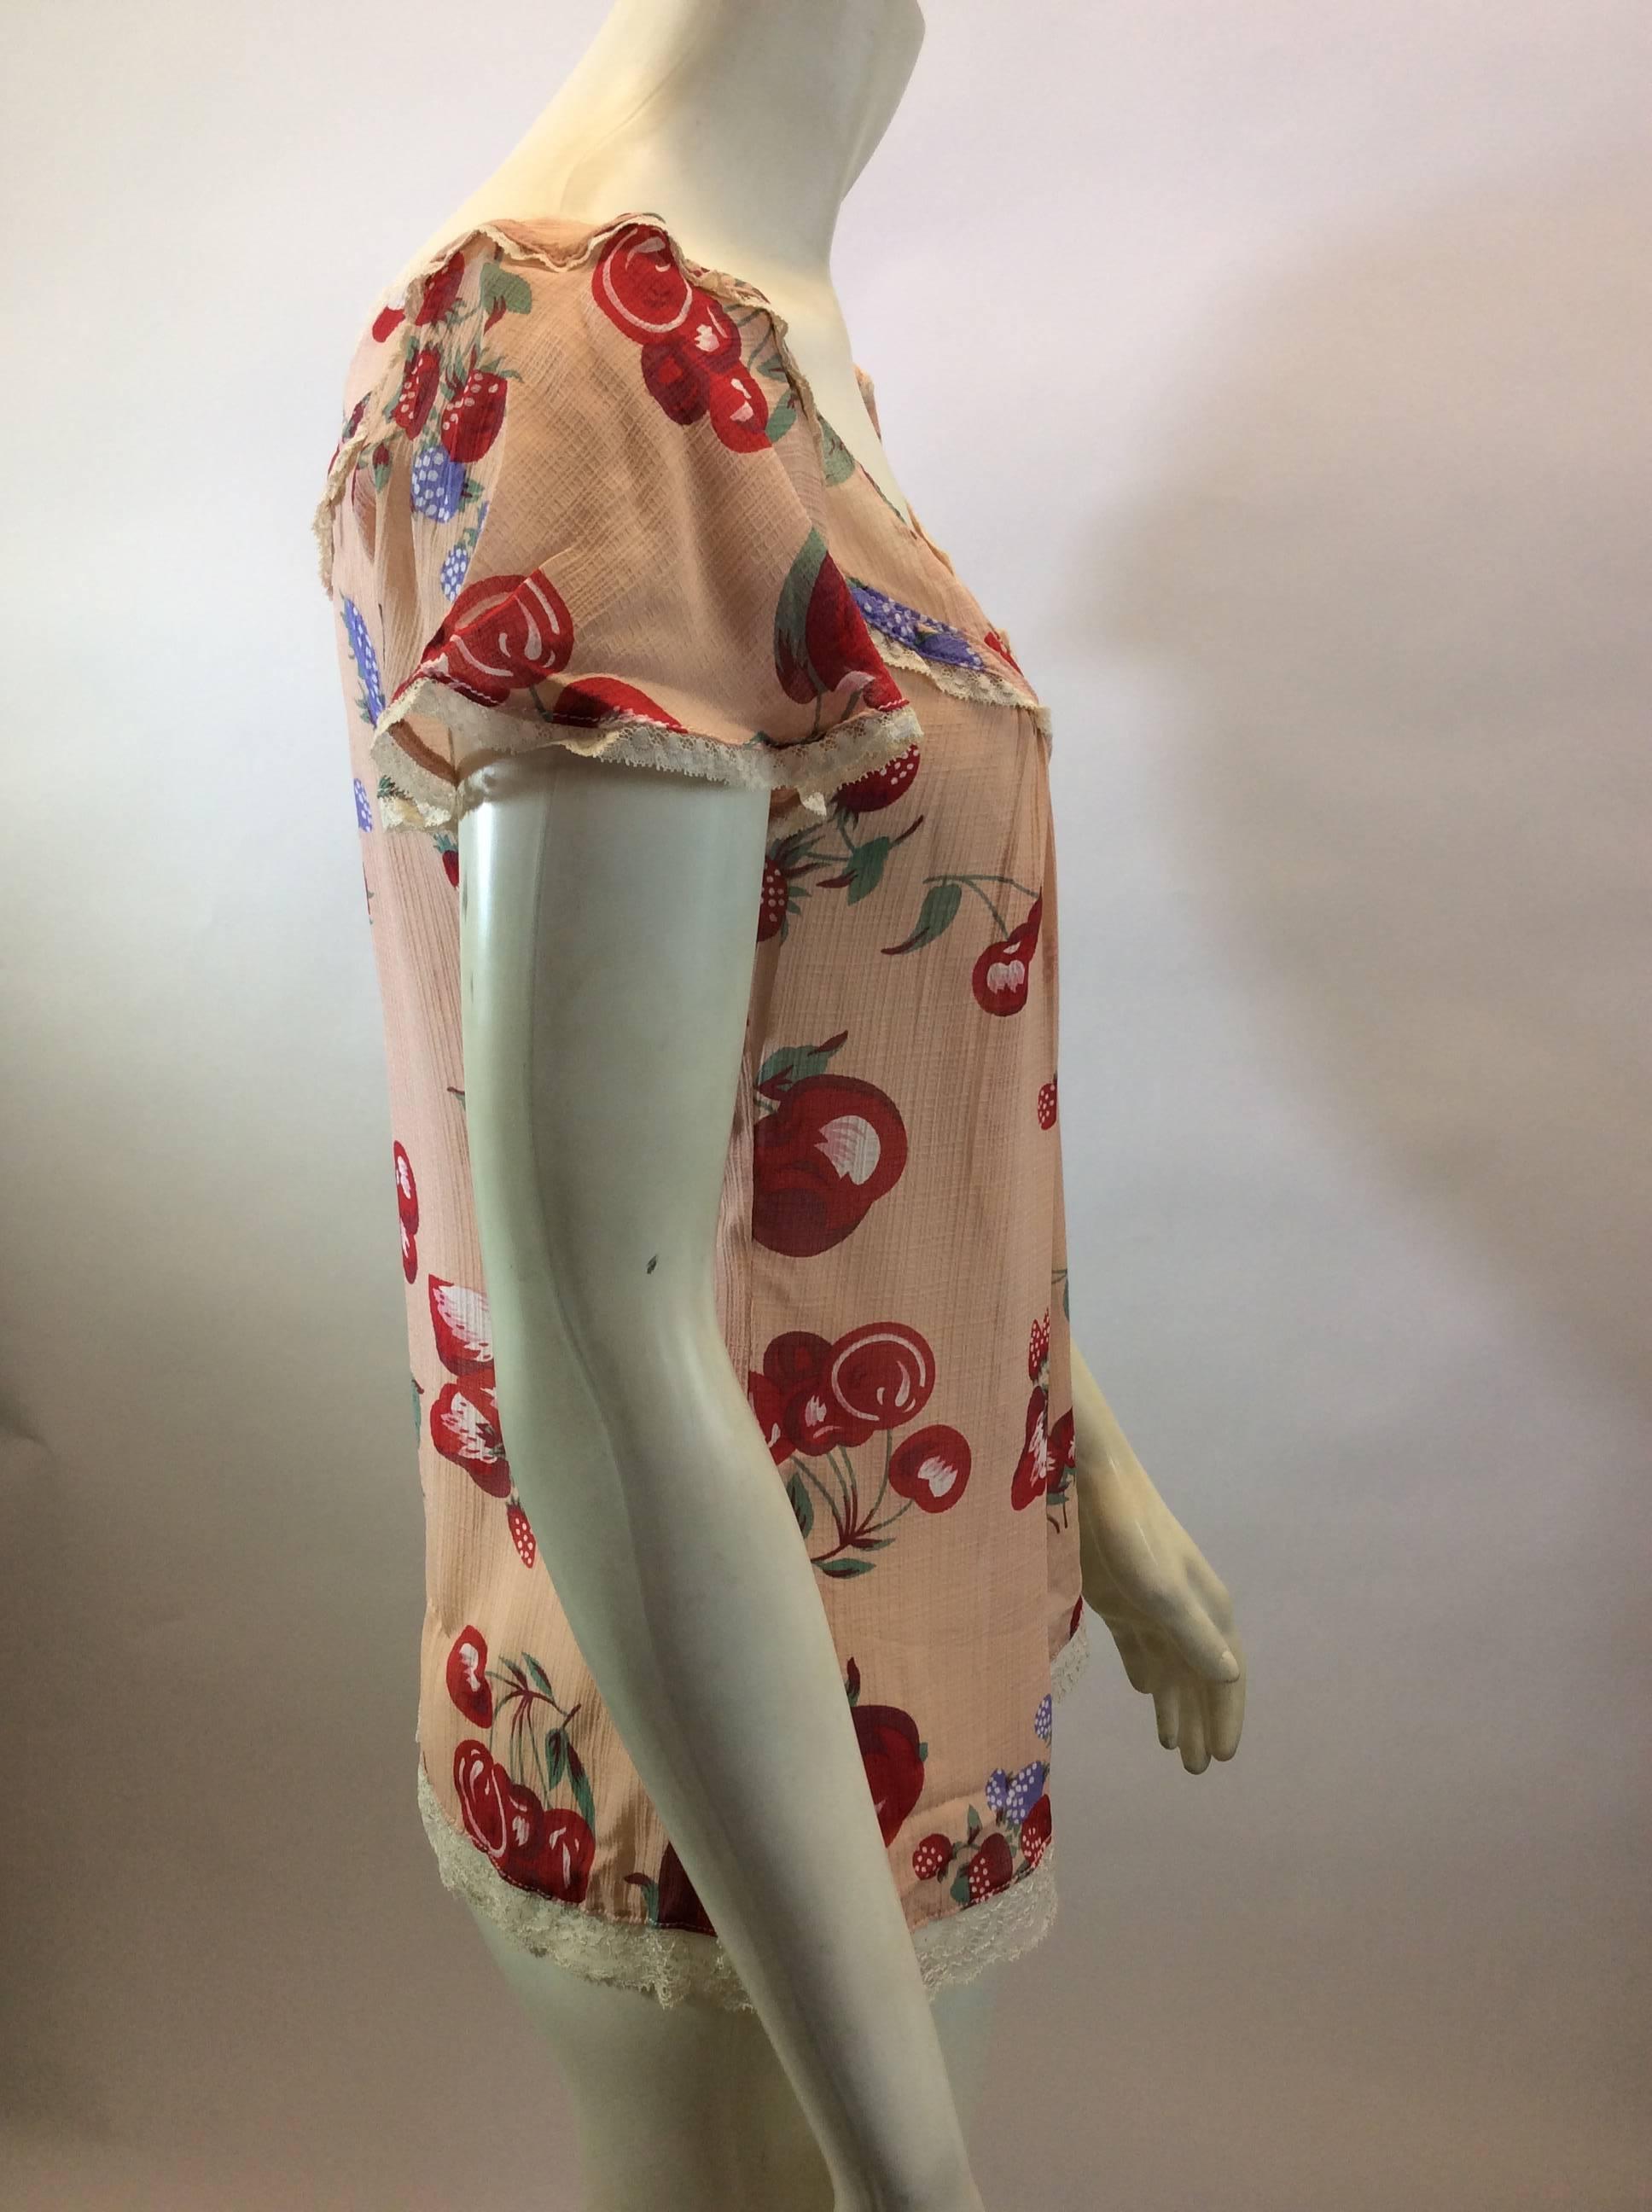 Dolce & Gabbana Cherry Print Silk Blouse In Excellent Condition For Sale In Narberth, PA